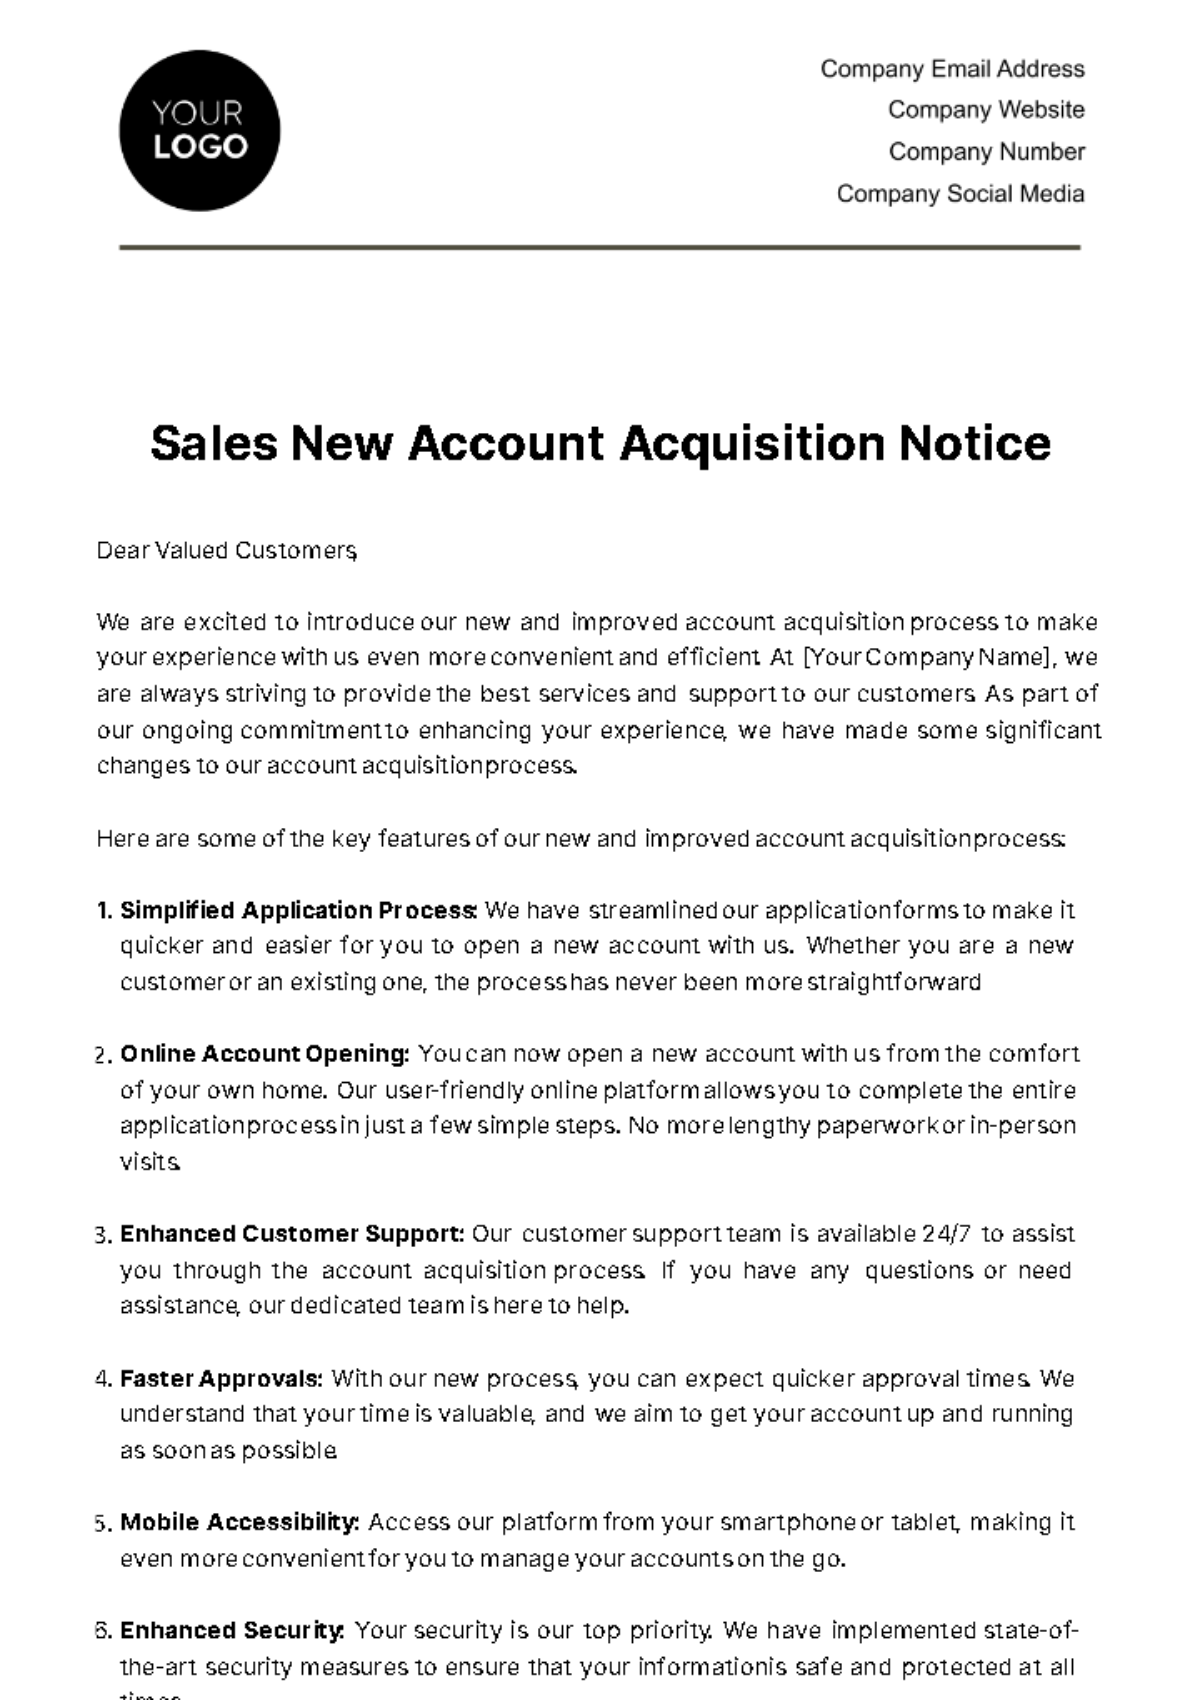 Free Sales New Account Acquisition Notice Template